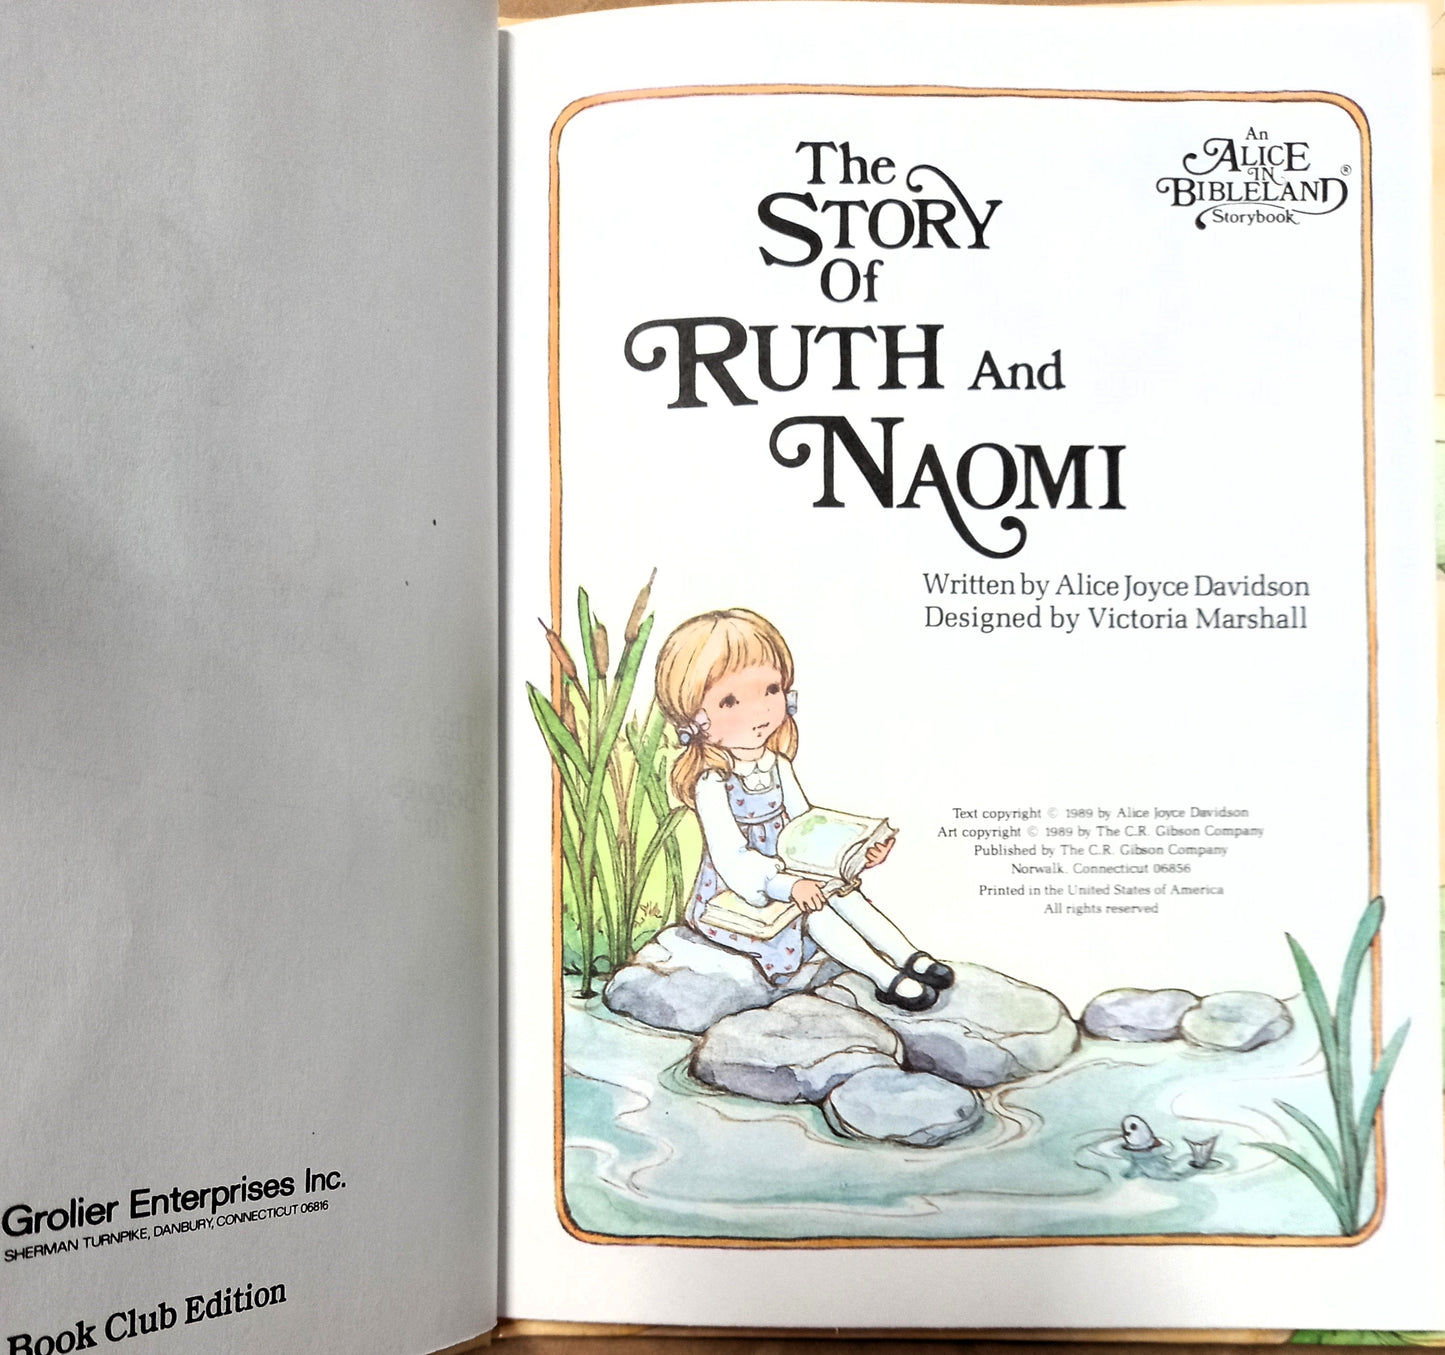 The Story of Ruth and Naomi